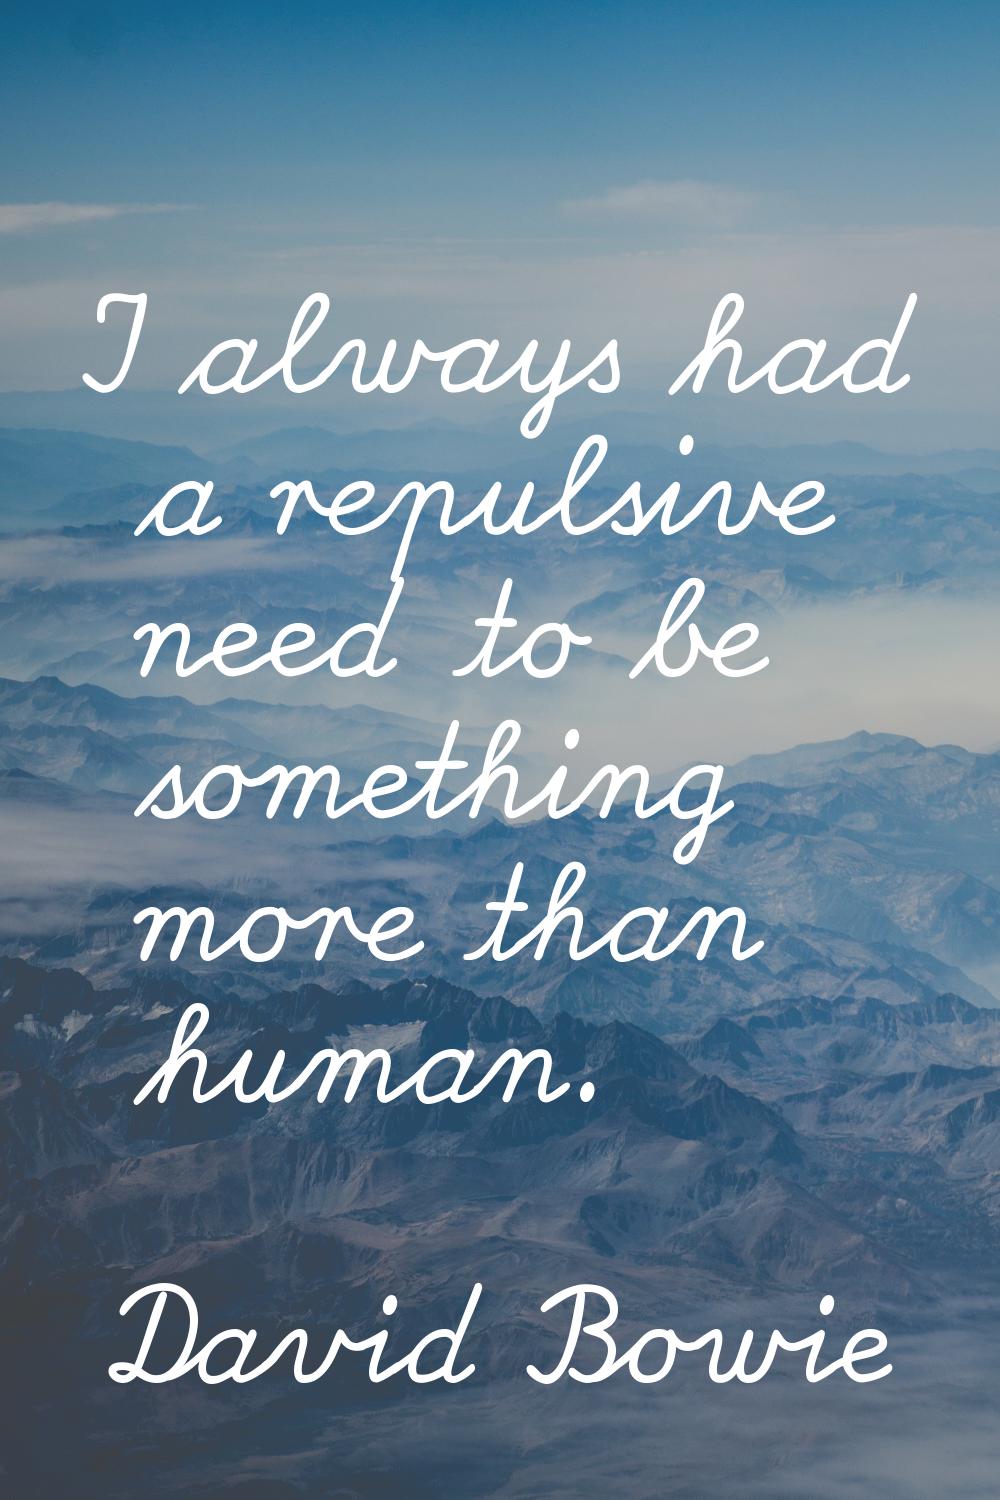 I always had a repulsive need to be something more than human.